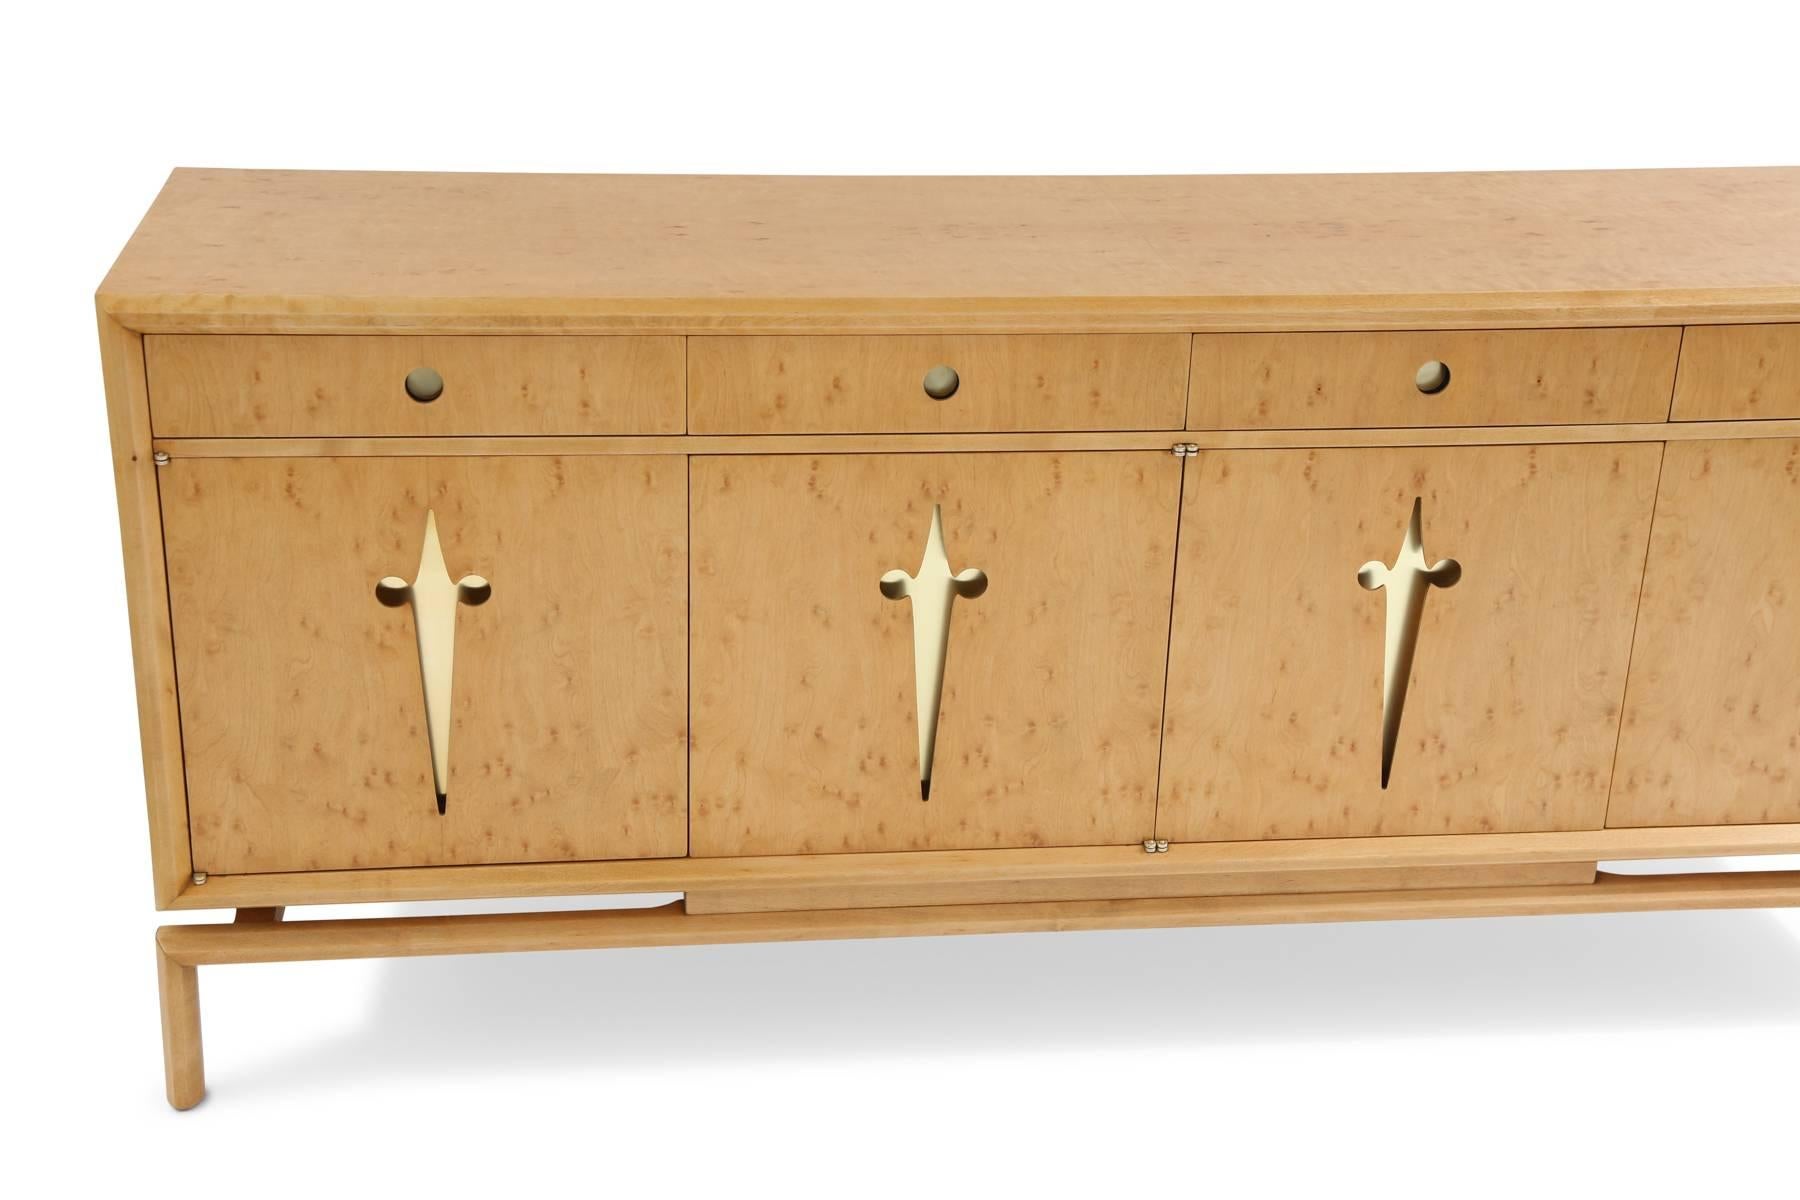 Edmund Spence maple and brass chest, circa late 1950s. This example has beautifully grained solid maple case legs and drawer fronts with interior and exterior drawers. The drawer and door pulls have inset brass. It has been newly and impeccably